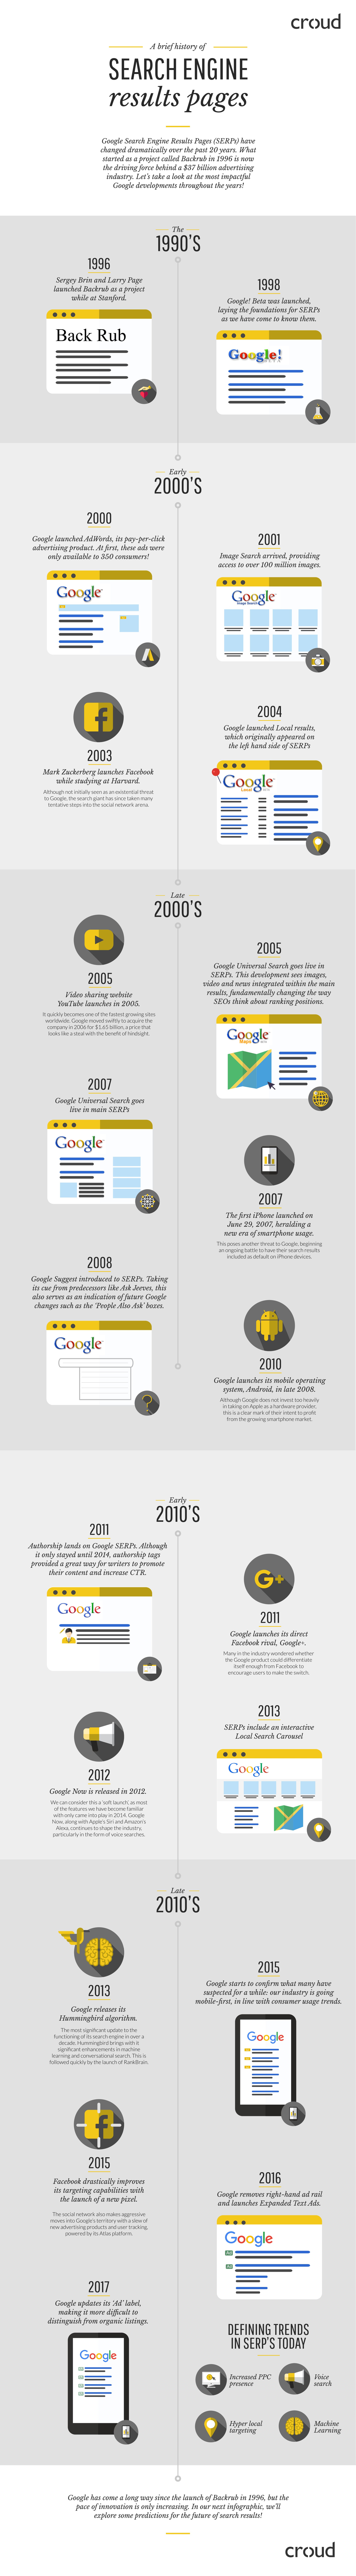 The Saga of SERPs or Search Engine Result Pages - Infographic